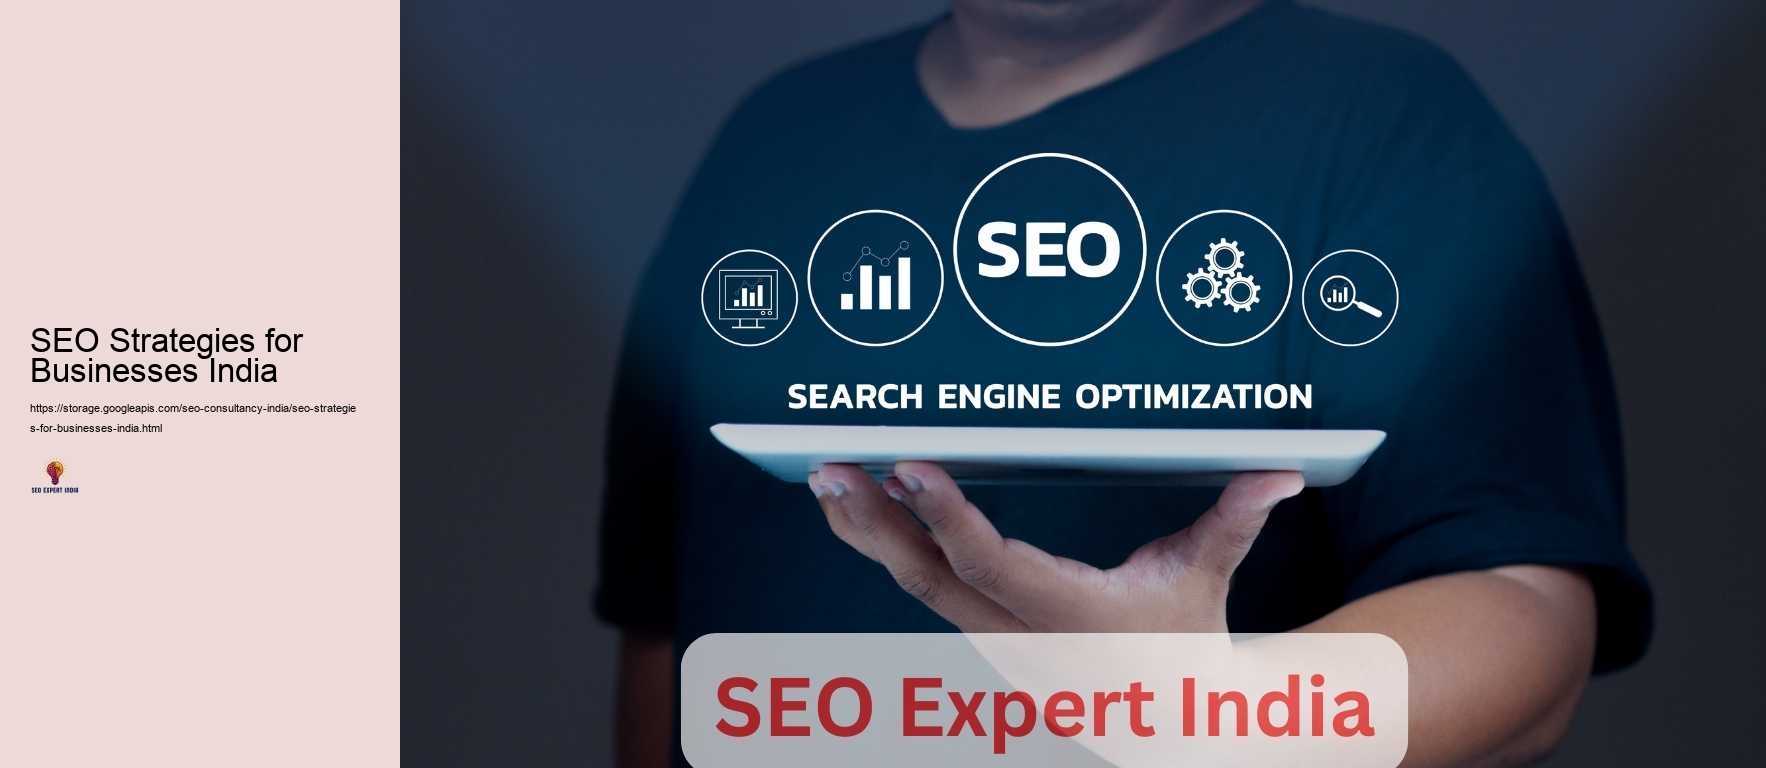 SEO Strategies for Businesses India